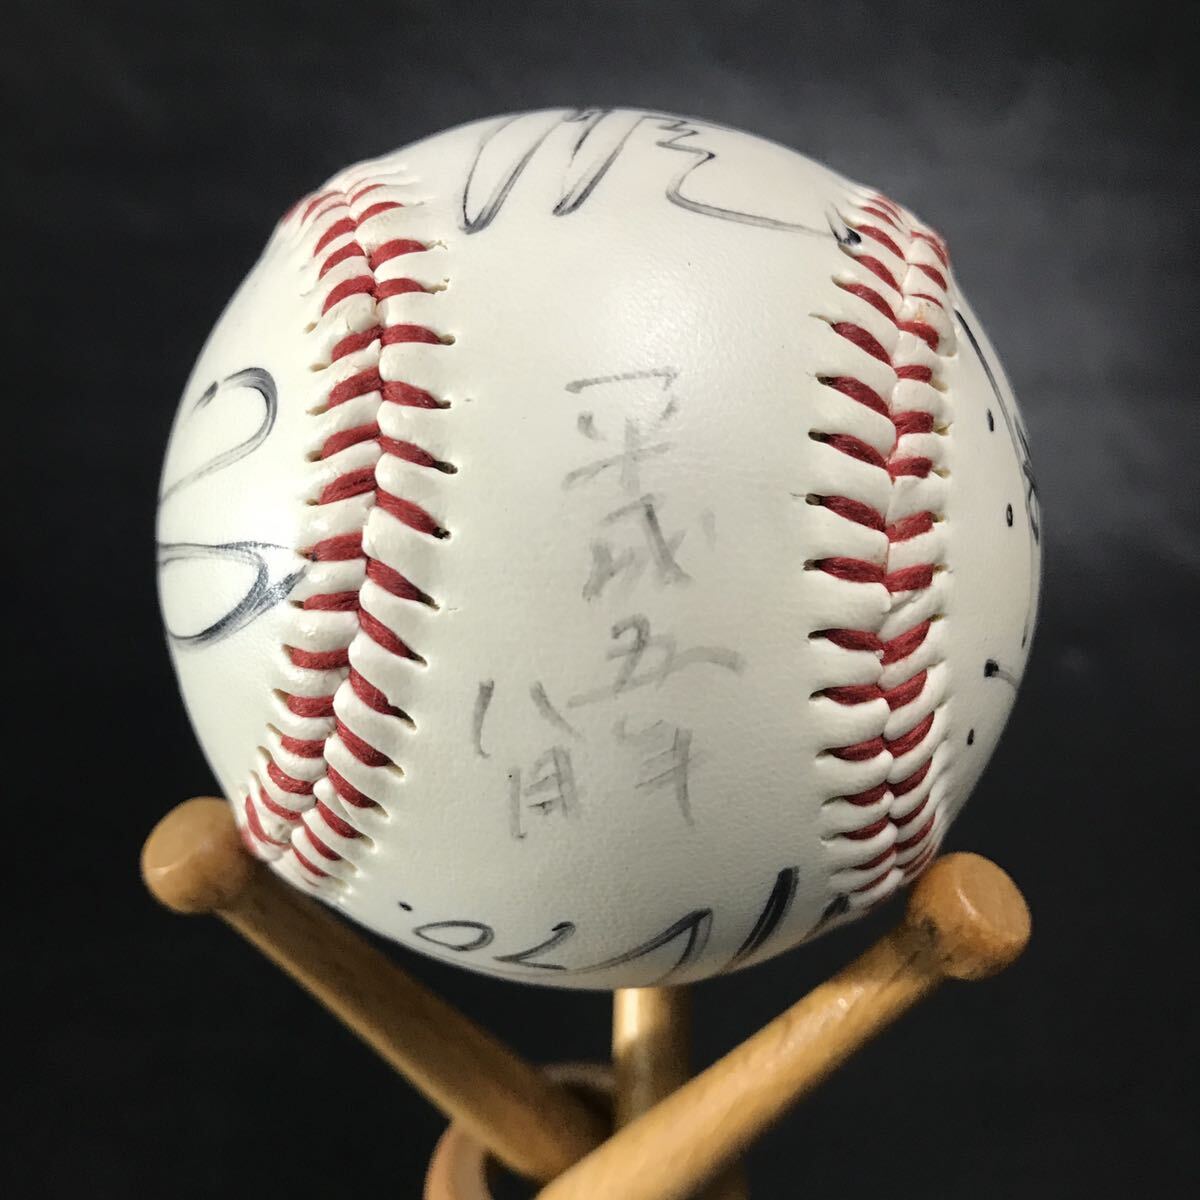 A56. person army Nagashima Shigeo autograph ball Heisei era 5 year 8 month other collection of autographs Professional Baseball ball put attaching collection 